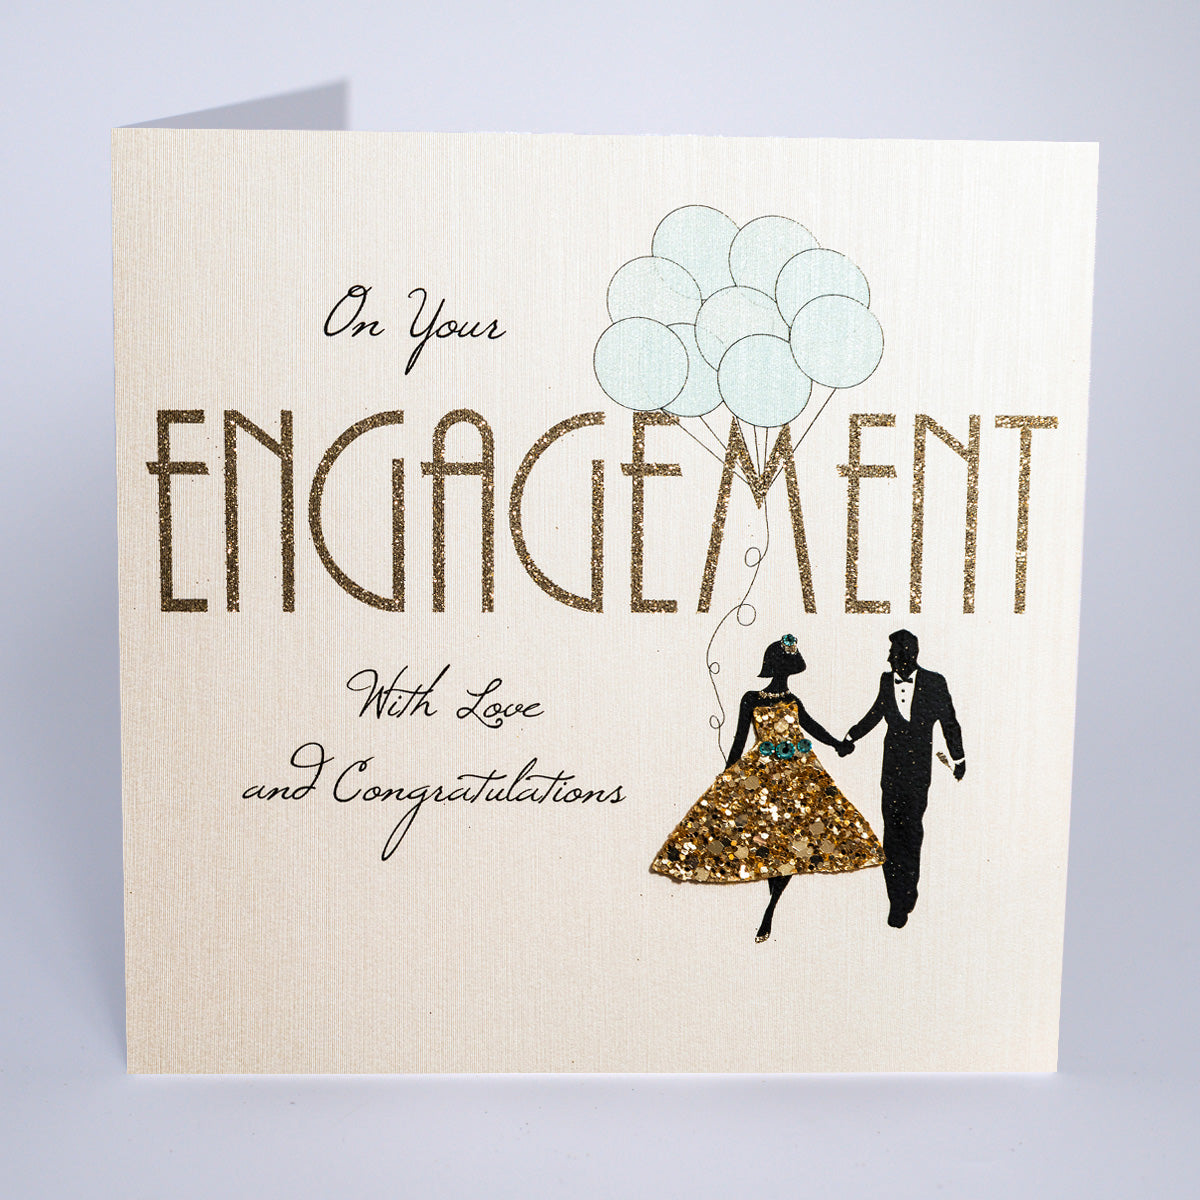 On Your Engagement - With Love and Congratulations